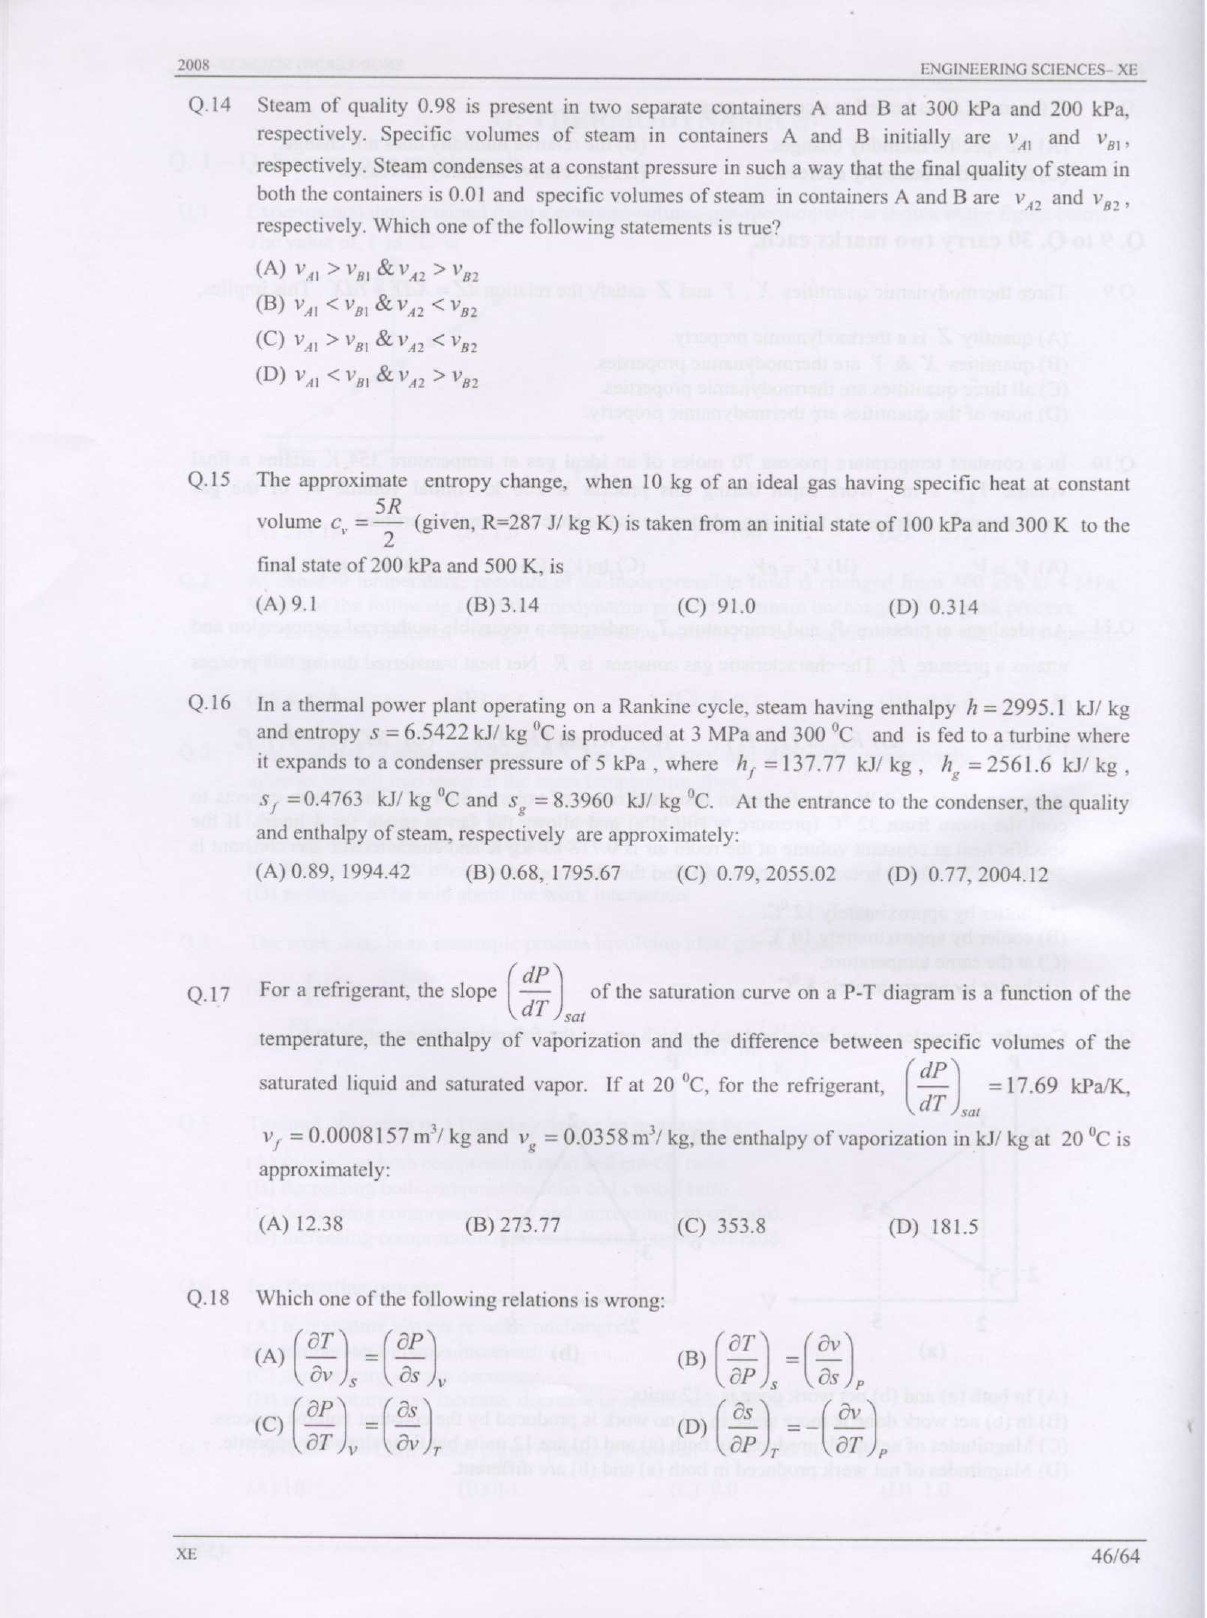 GATE Exam Question Paper 2008 Engineering Sciences 46